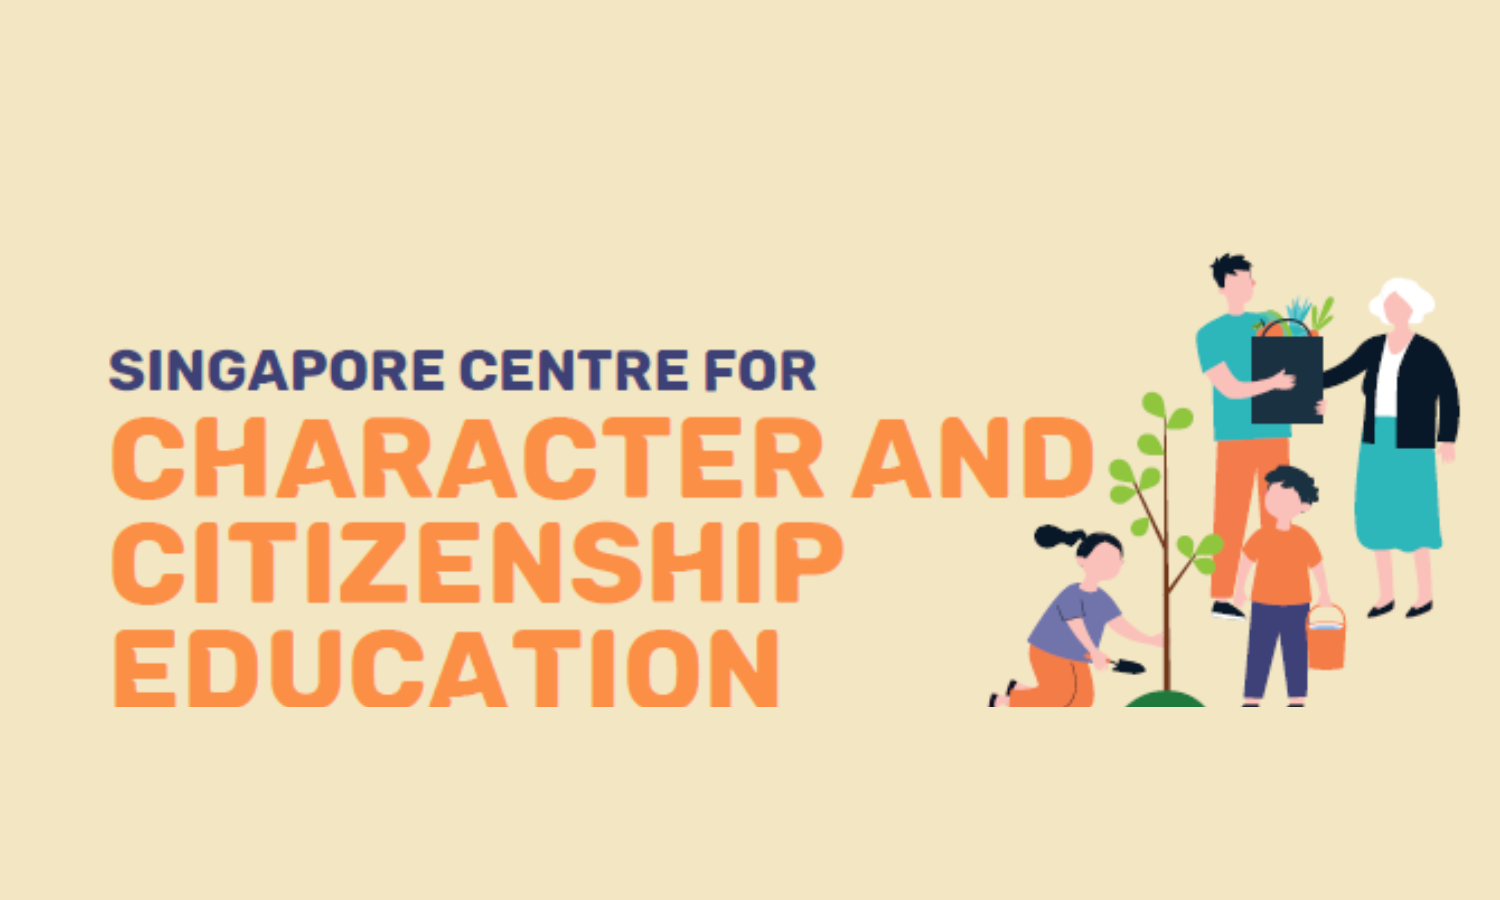 The Singapore Centre for Character and Citizenship Education